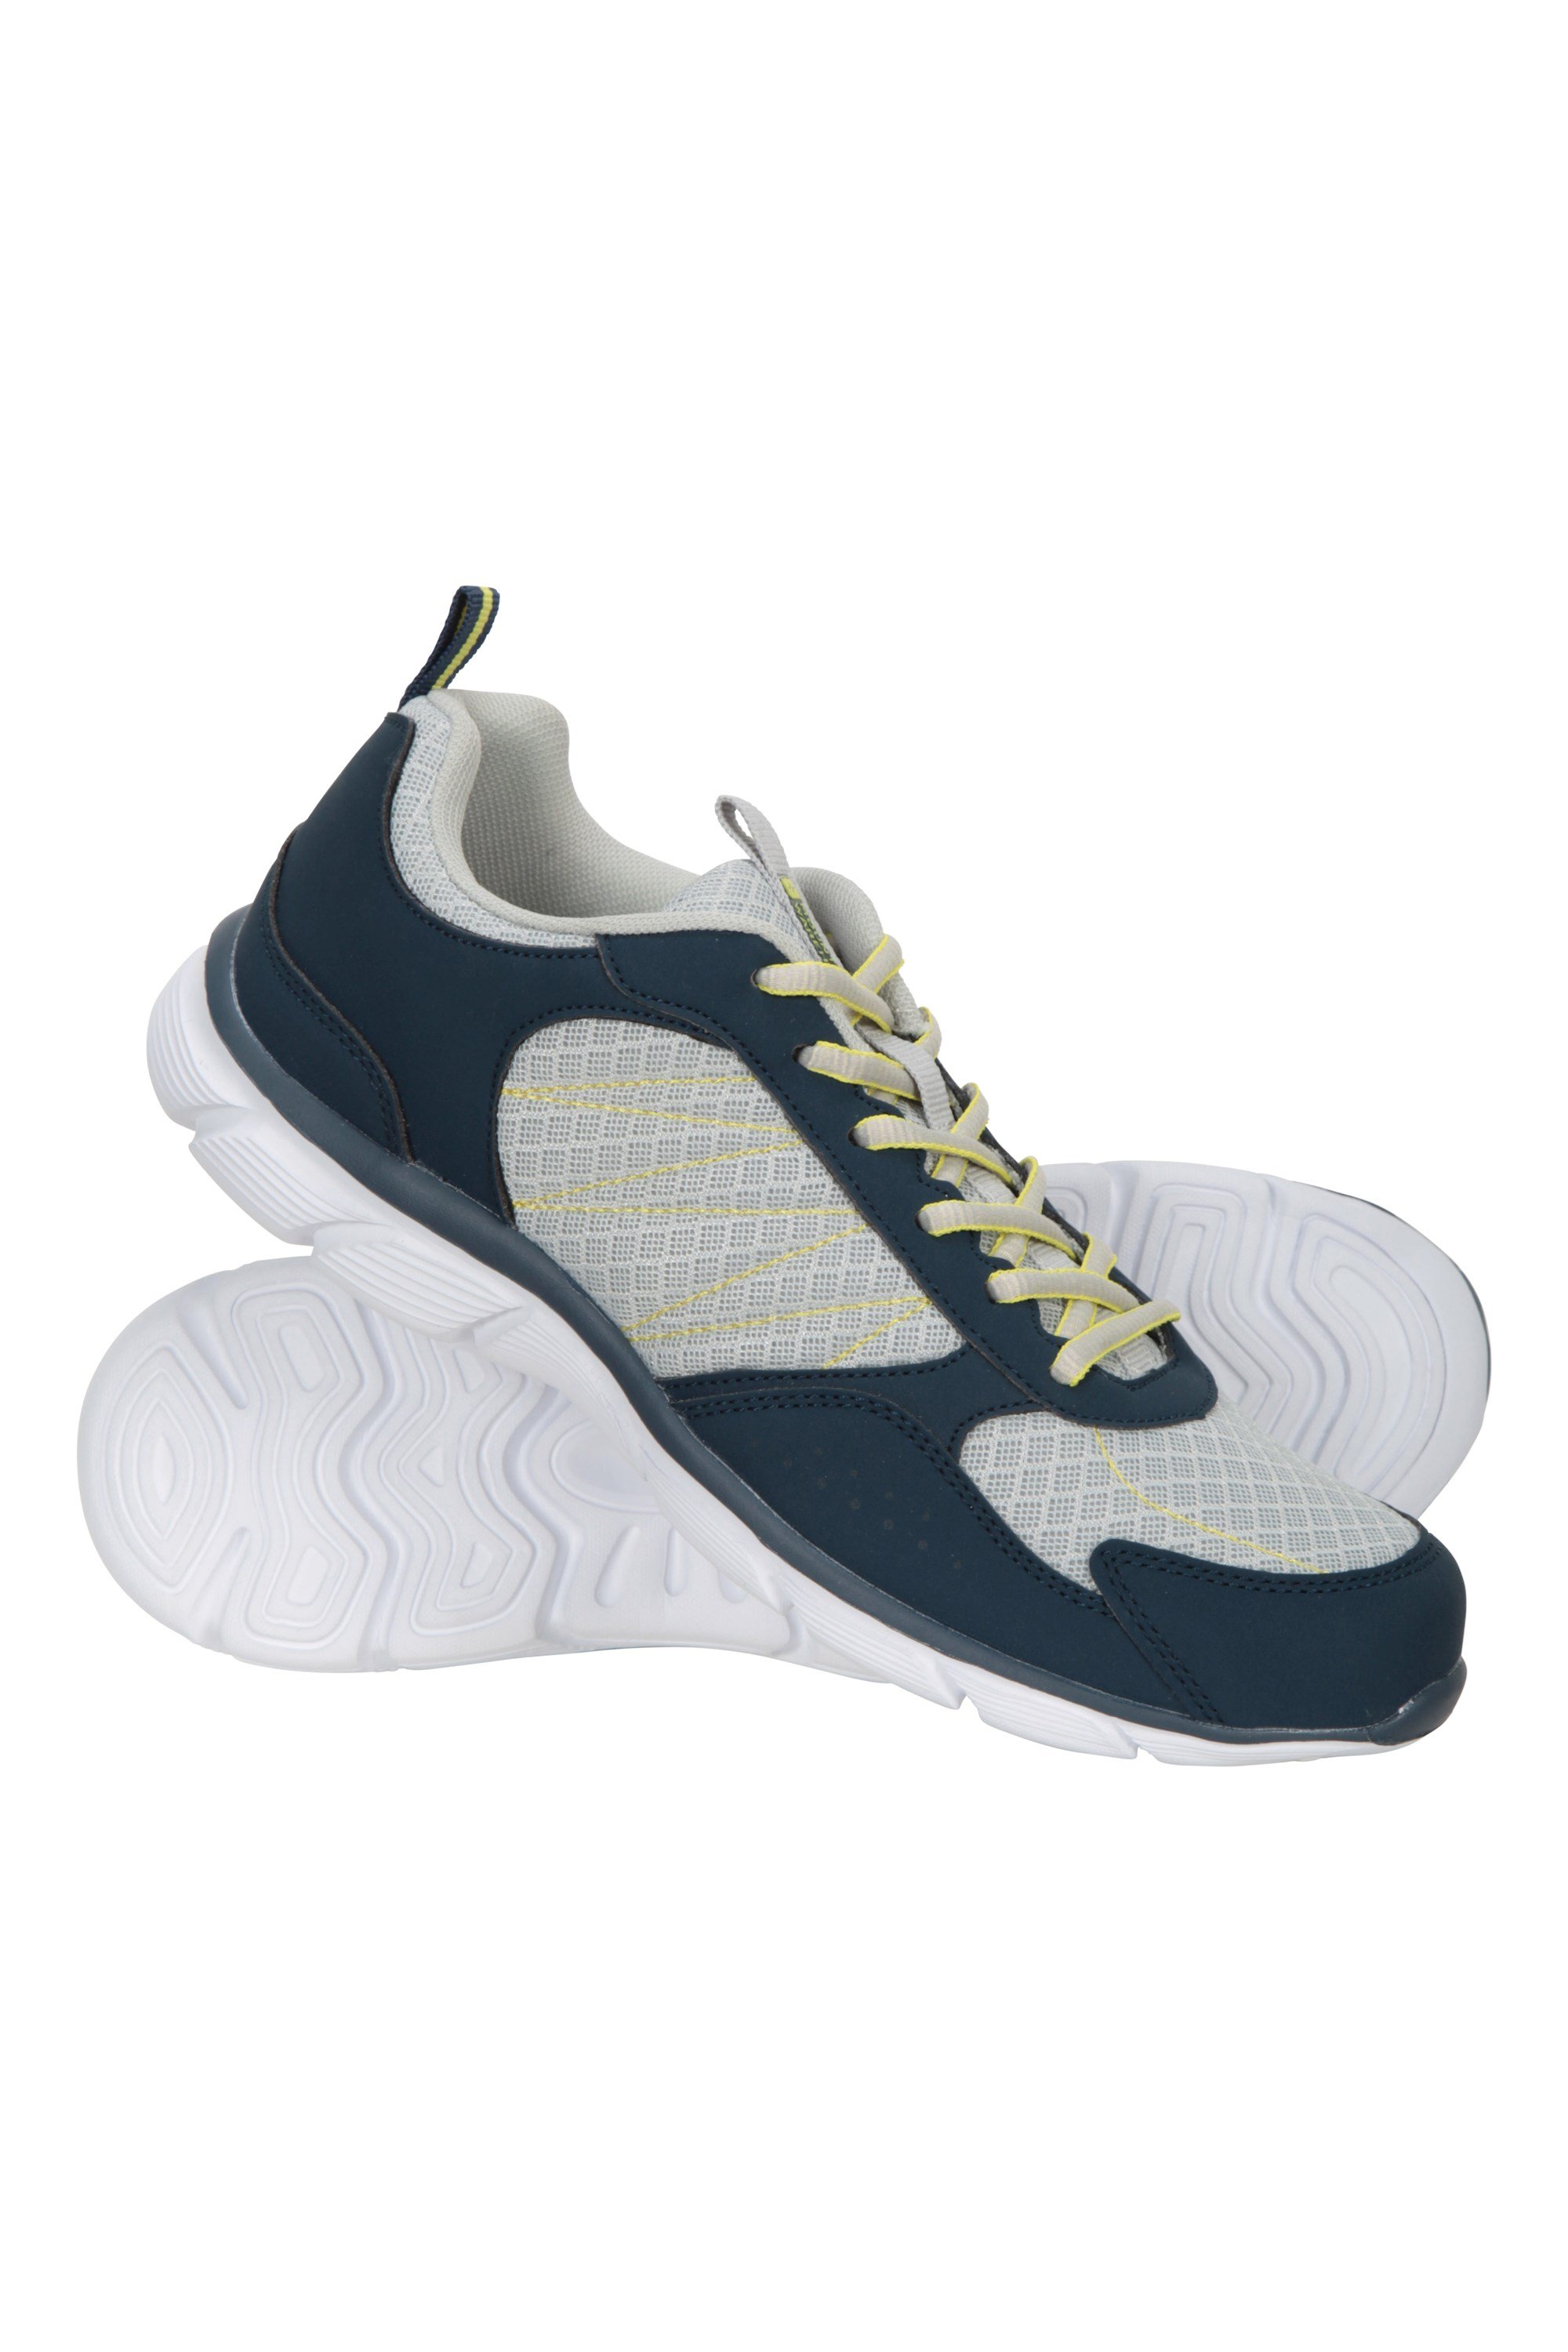 Mountain Warehouse Mountain Warehouse Ladies Active Shoes Lightweight Running Trainers Womens 